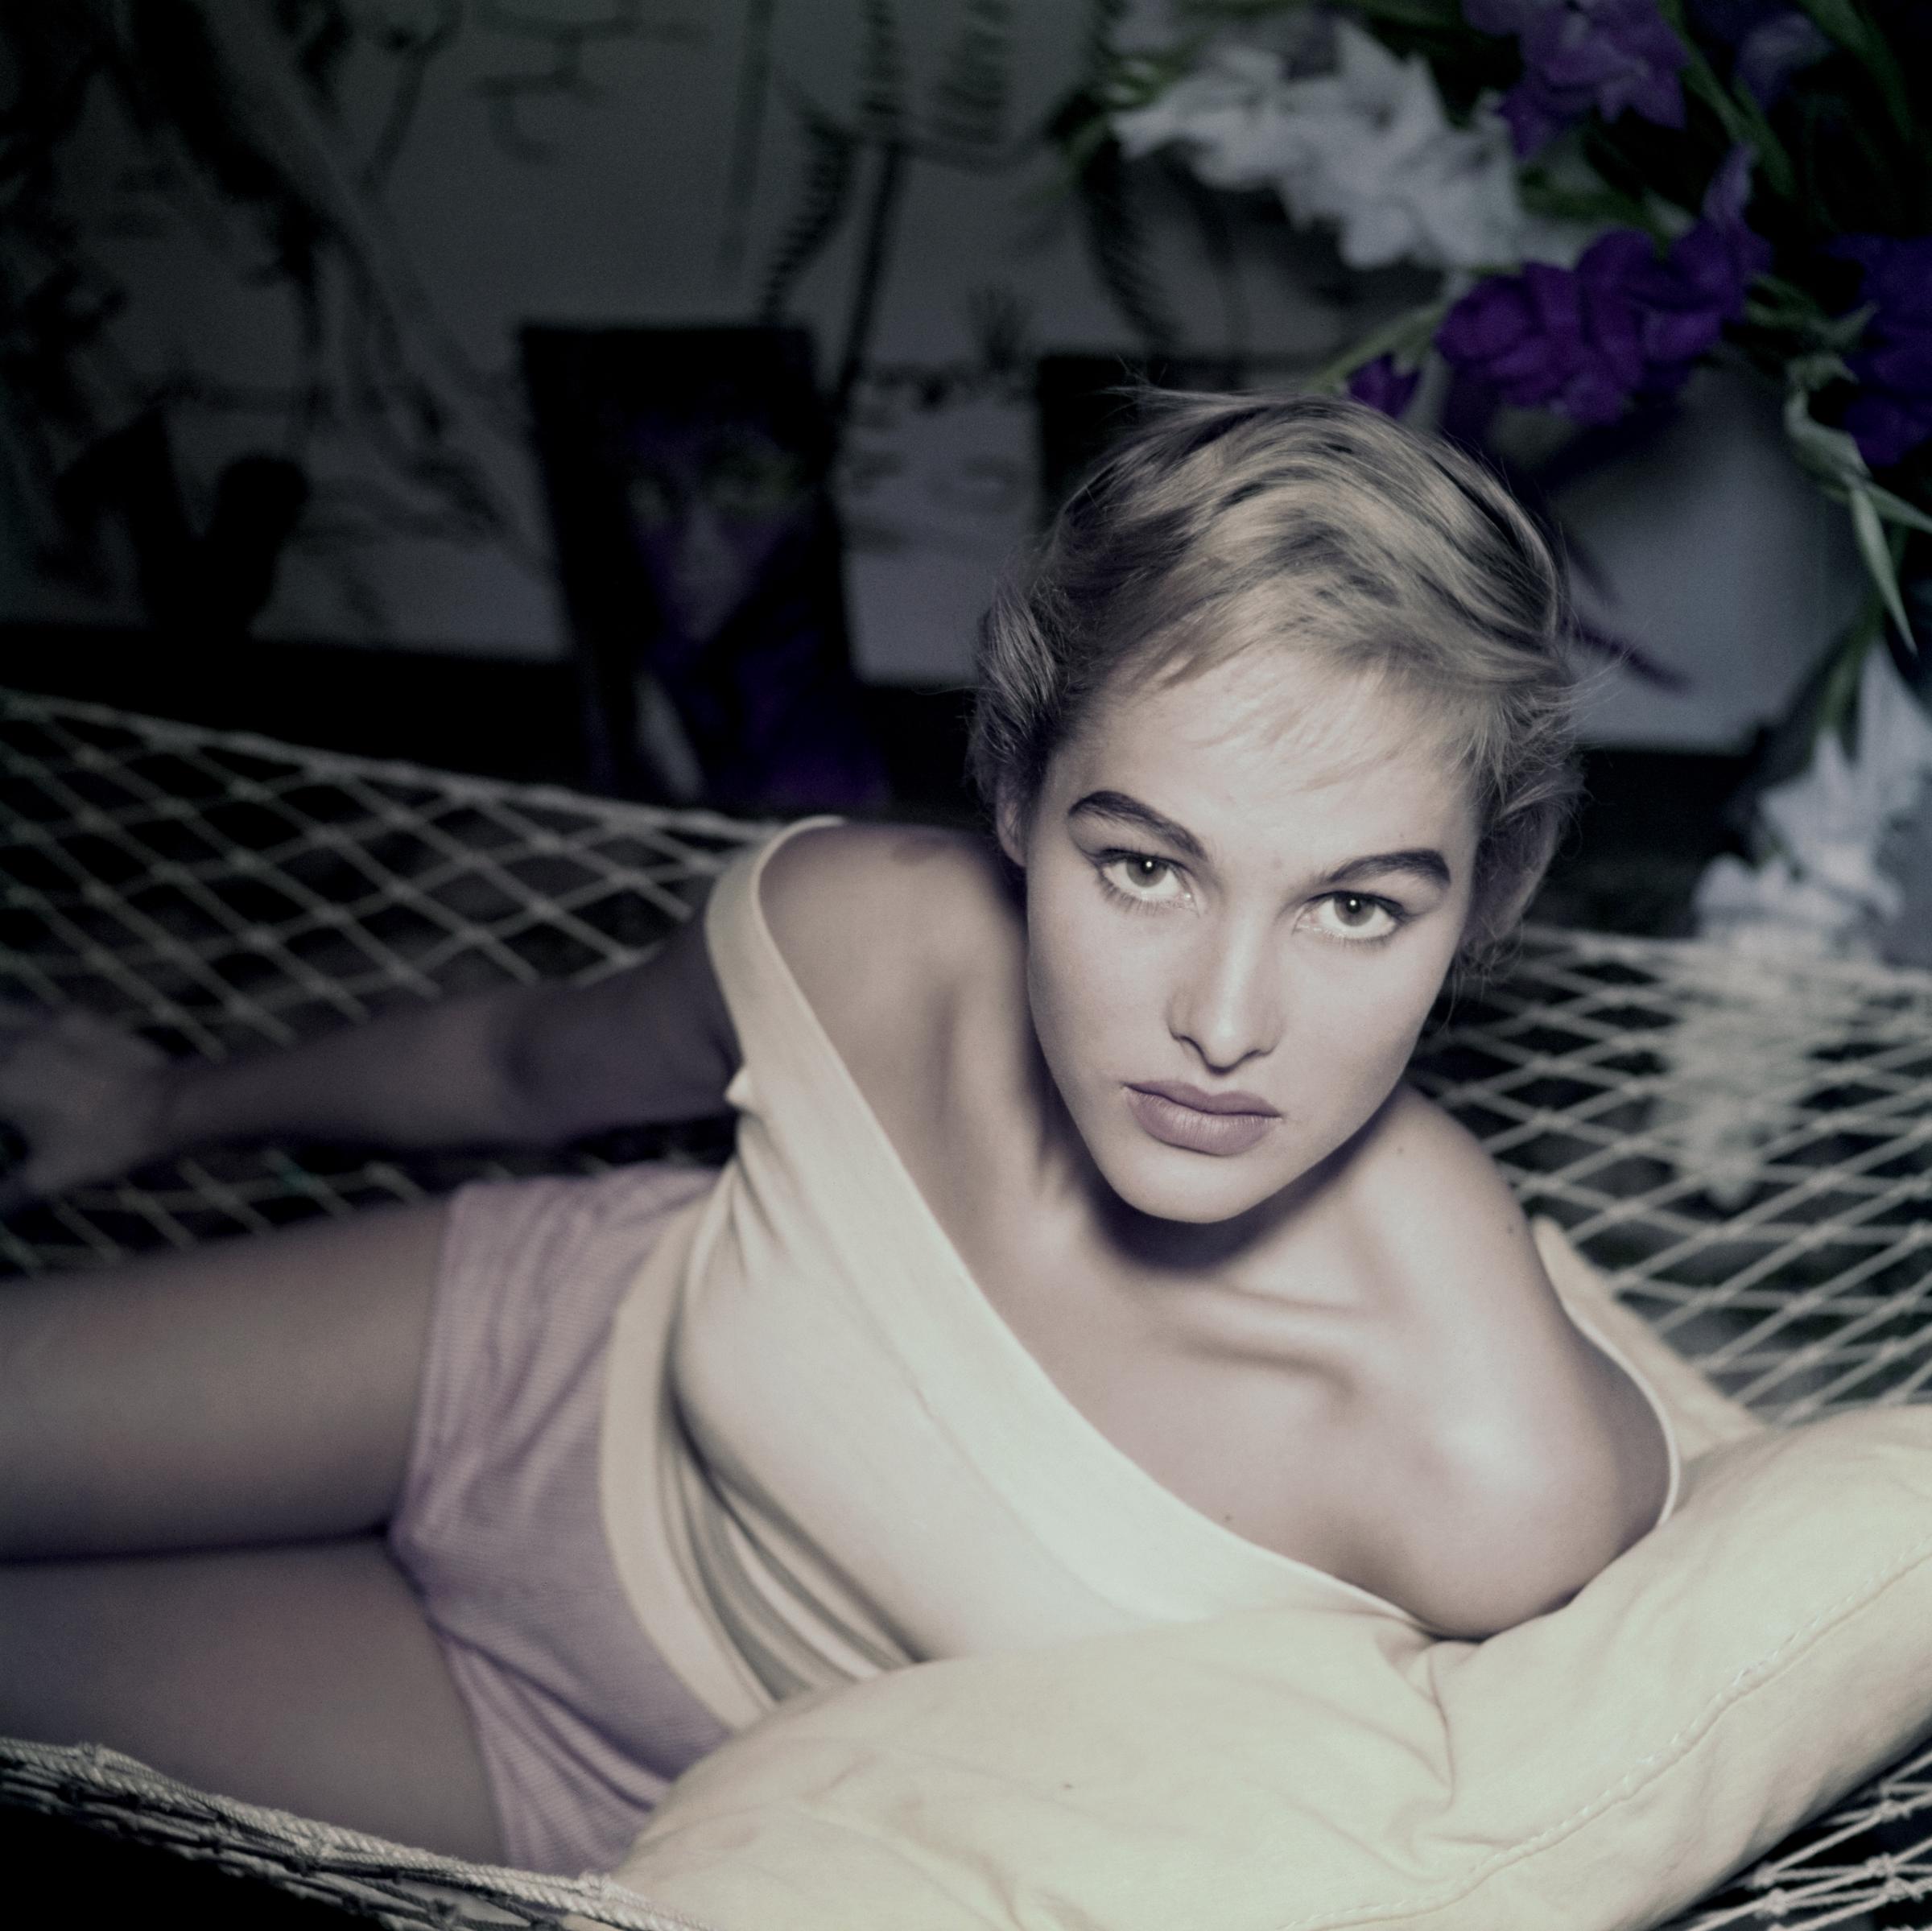 Ursula Andress poses in a hammock, in Rome, Italy, circa 1955. | Source: Getty Images